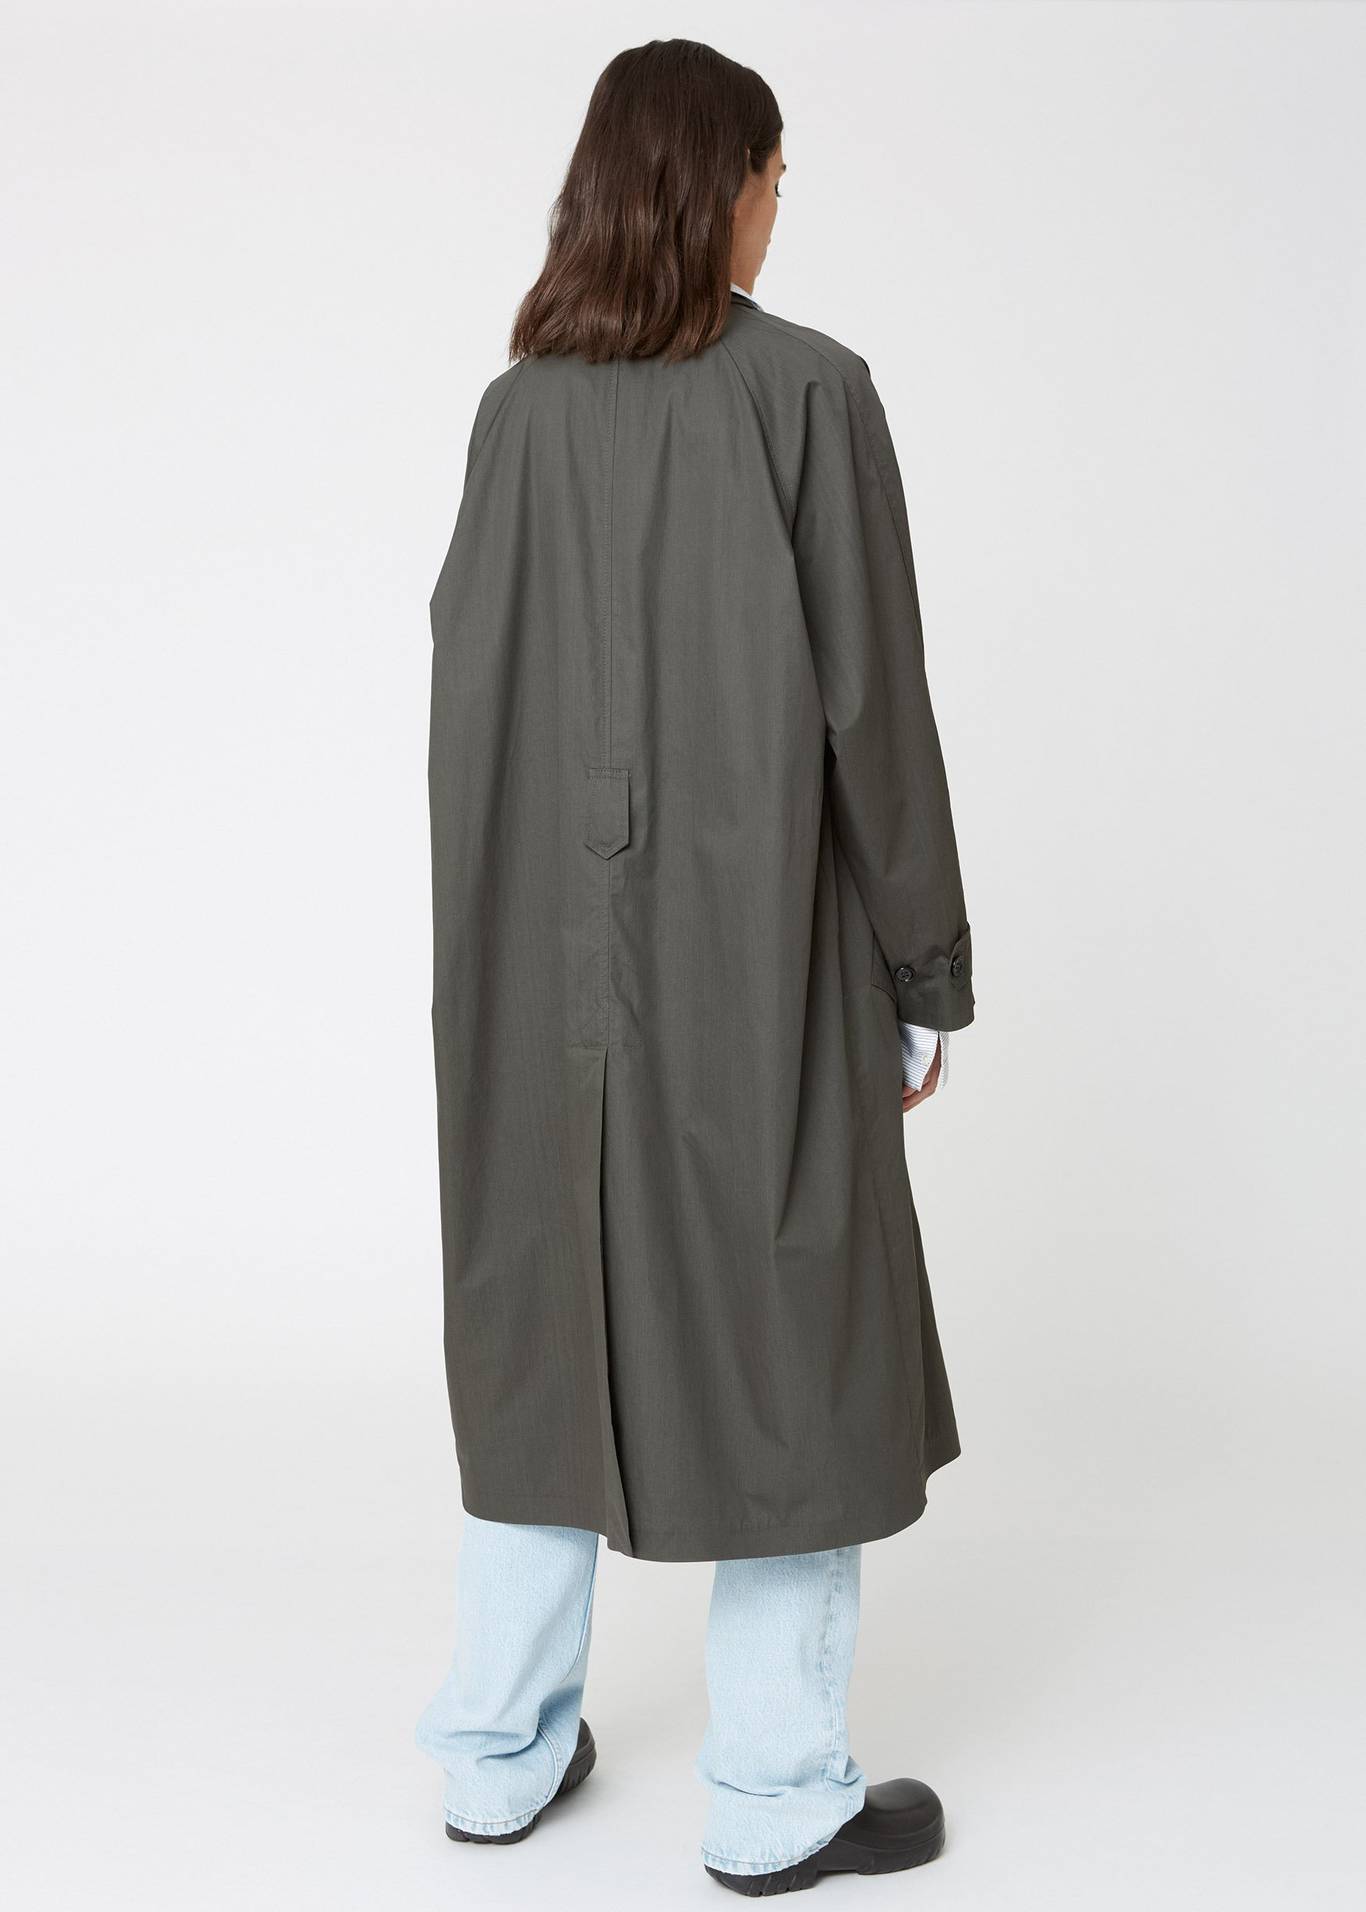 Canvas coat in pirate black by Hope